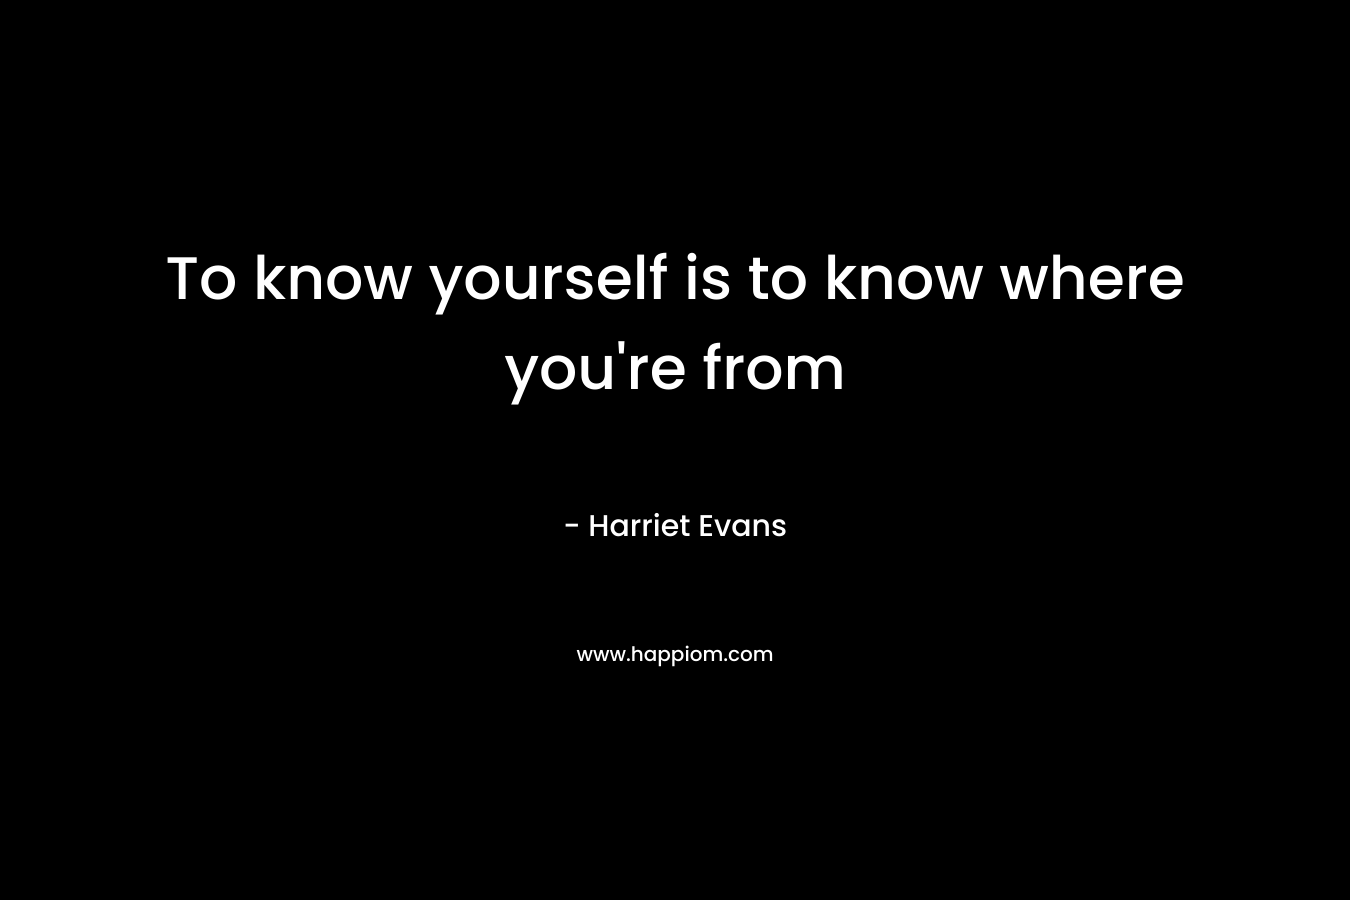 To know yourself is to know where you're from